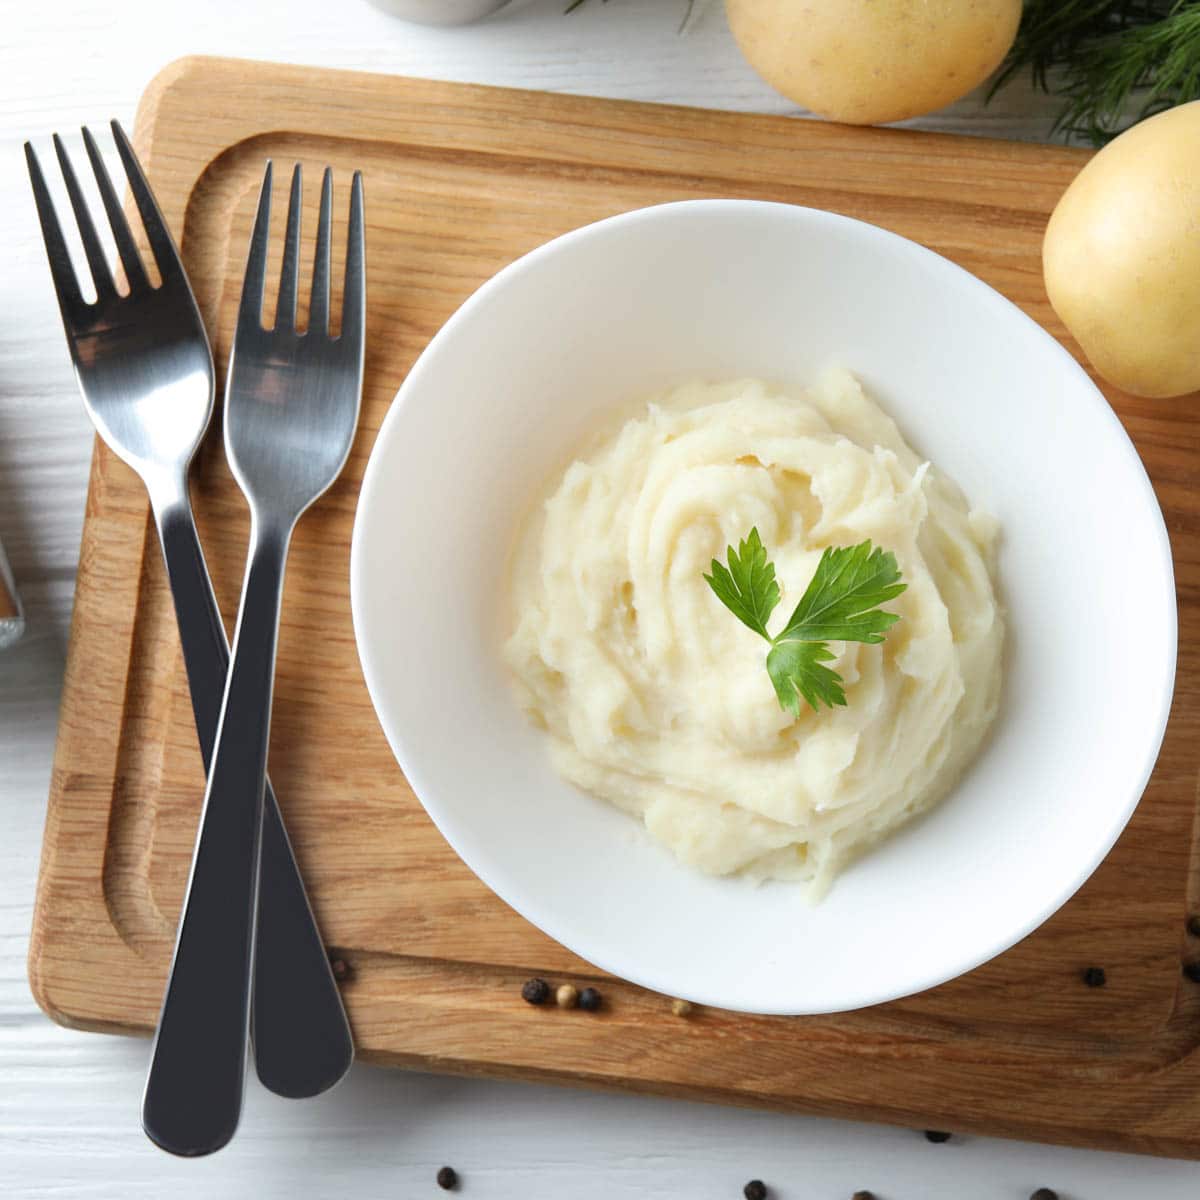 Bowl of mashed potatoes with a sprig of parsley sitting on a cutting board with 2 forks next to it crisscrossed.